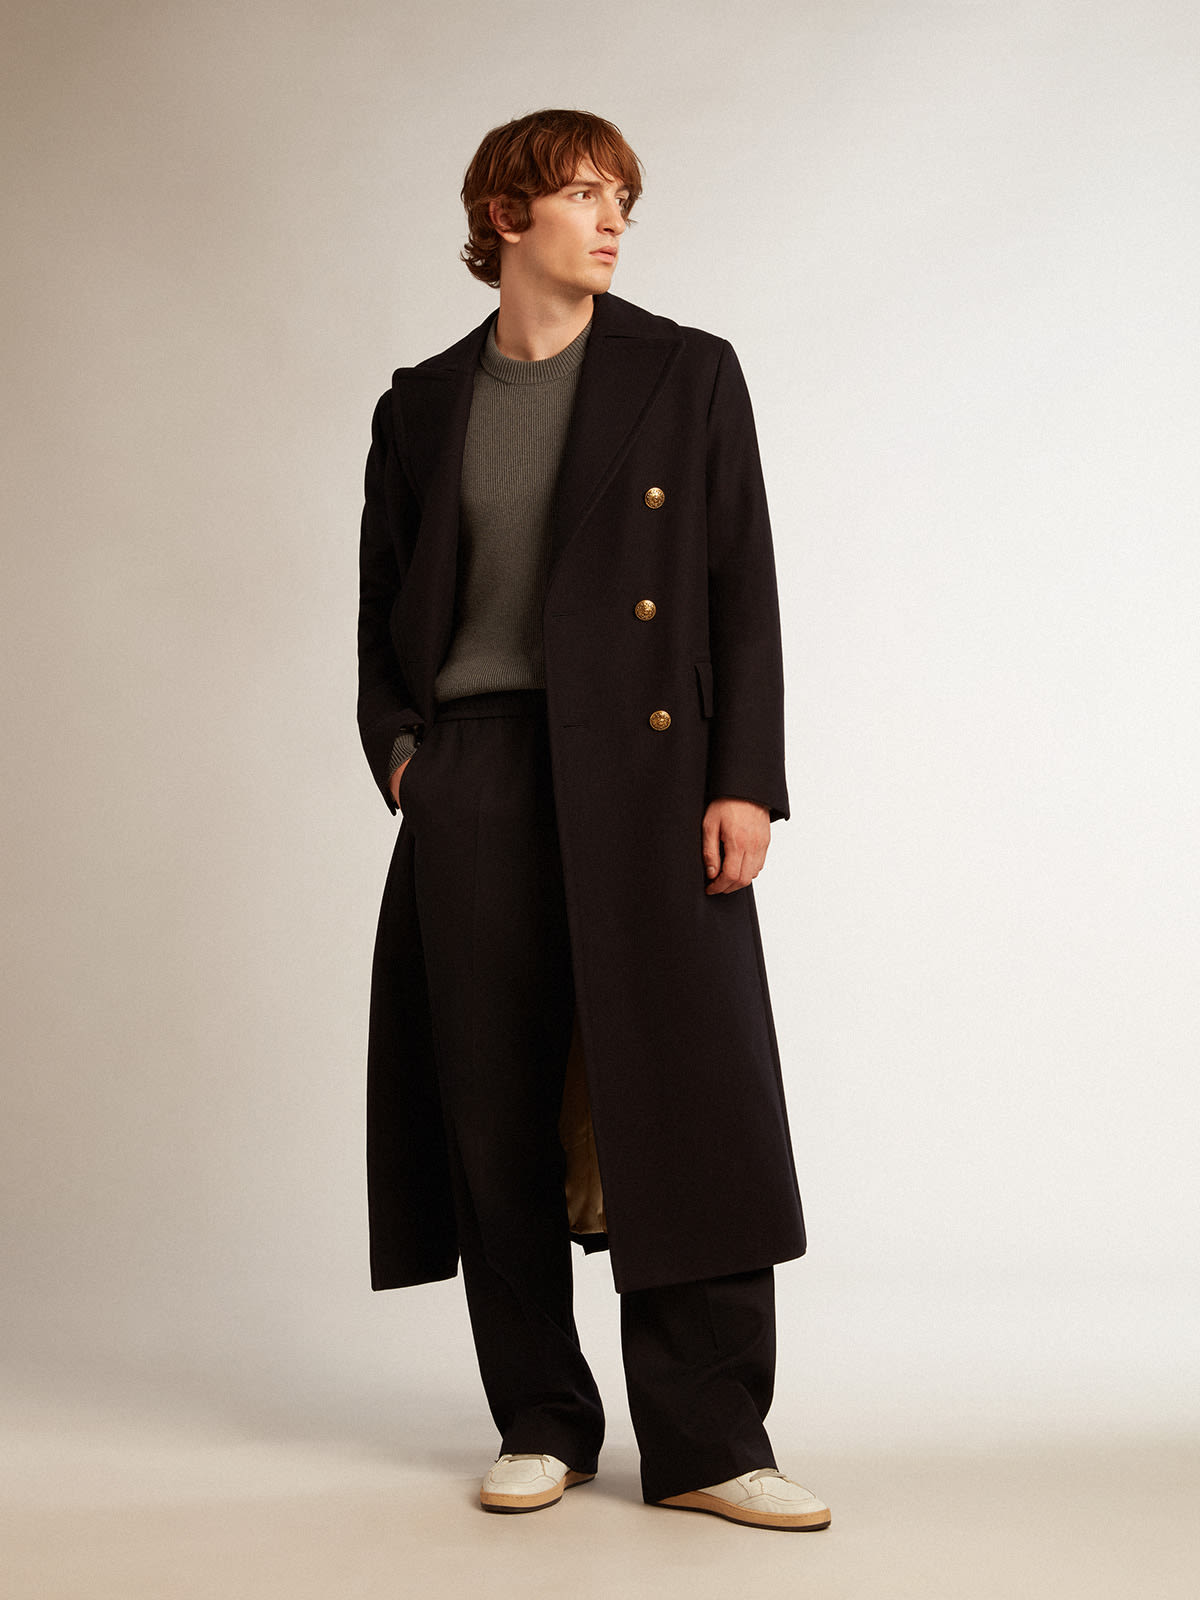 Golden Goose - Men's double-breasted coat in dark blue wool with gold-colored buttons in 